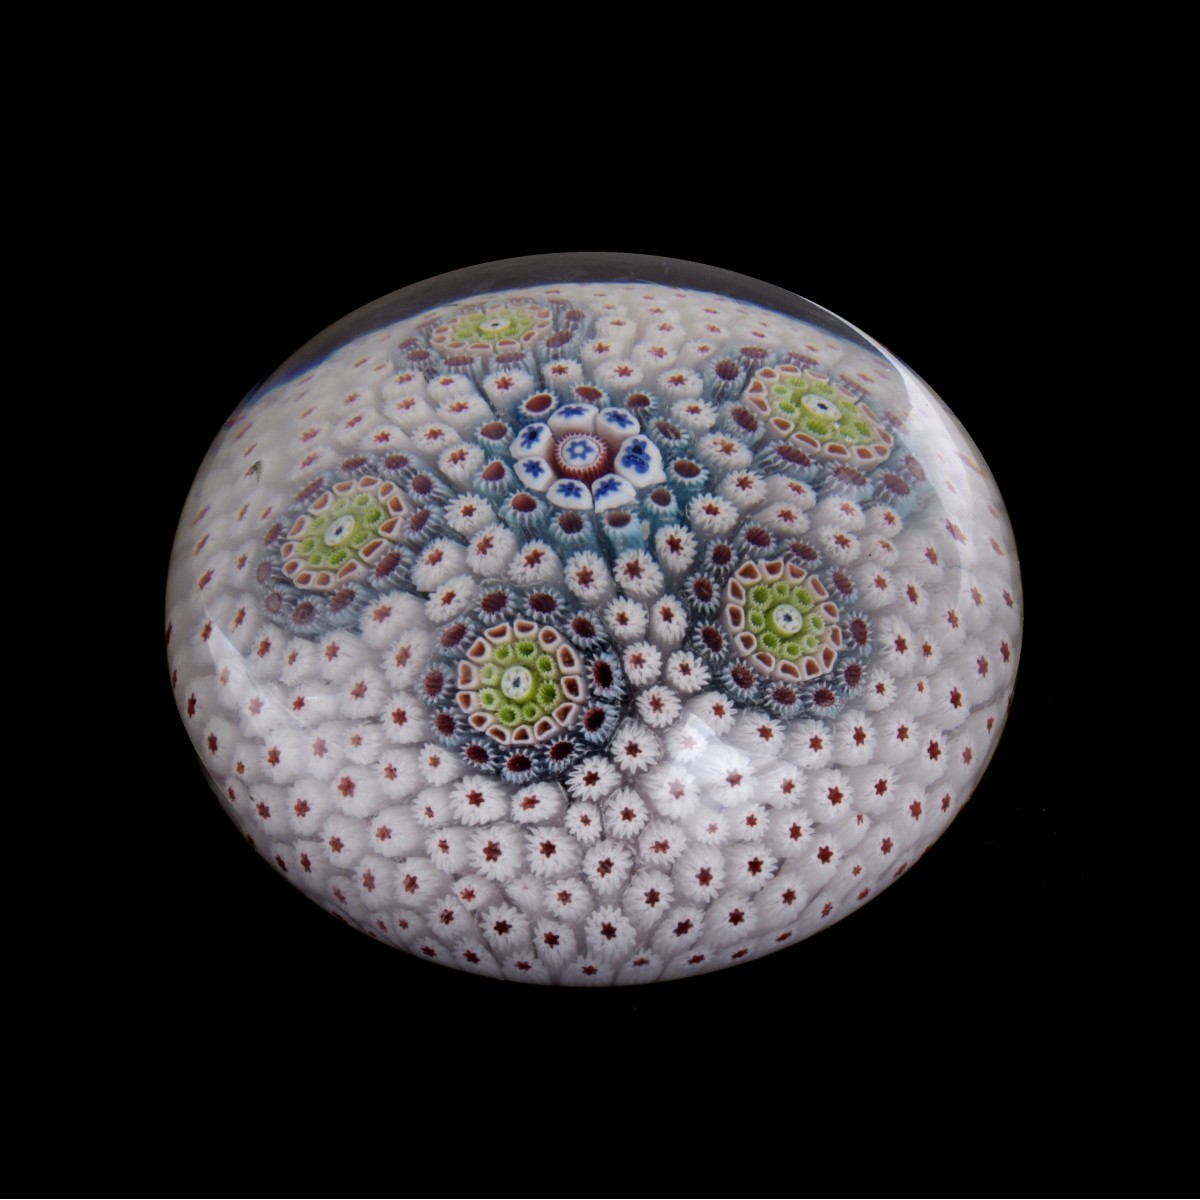 Possibly St. Louis Art Glass Paperweight